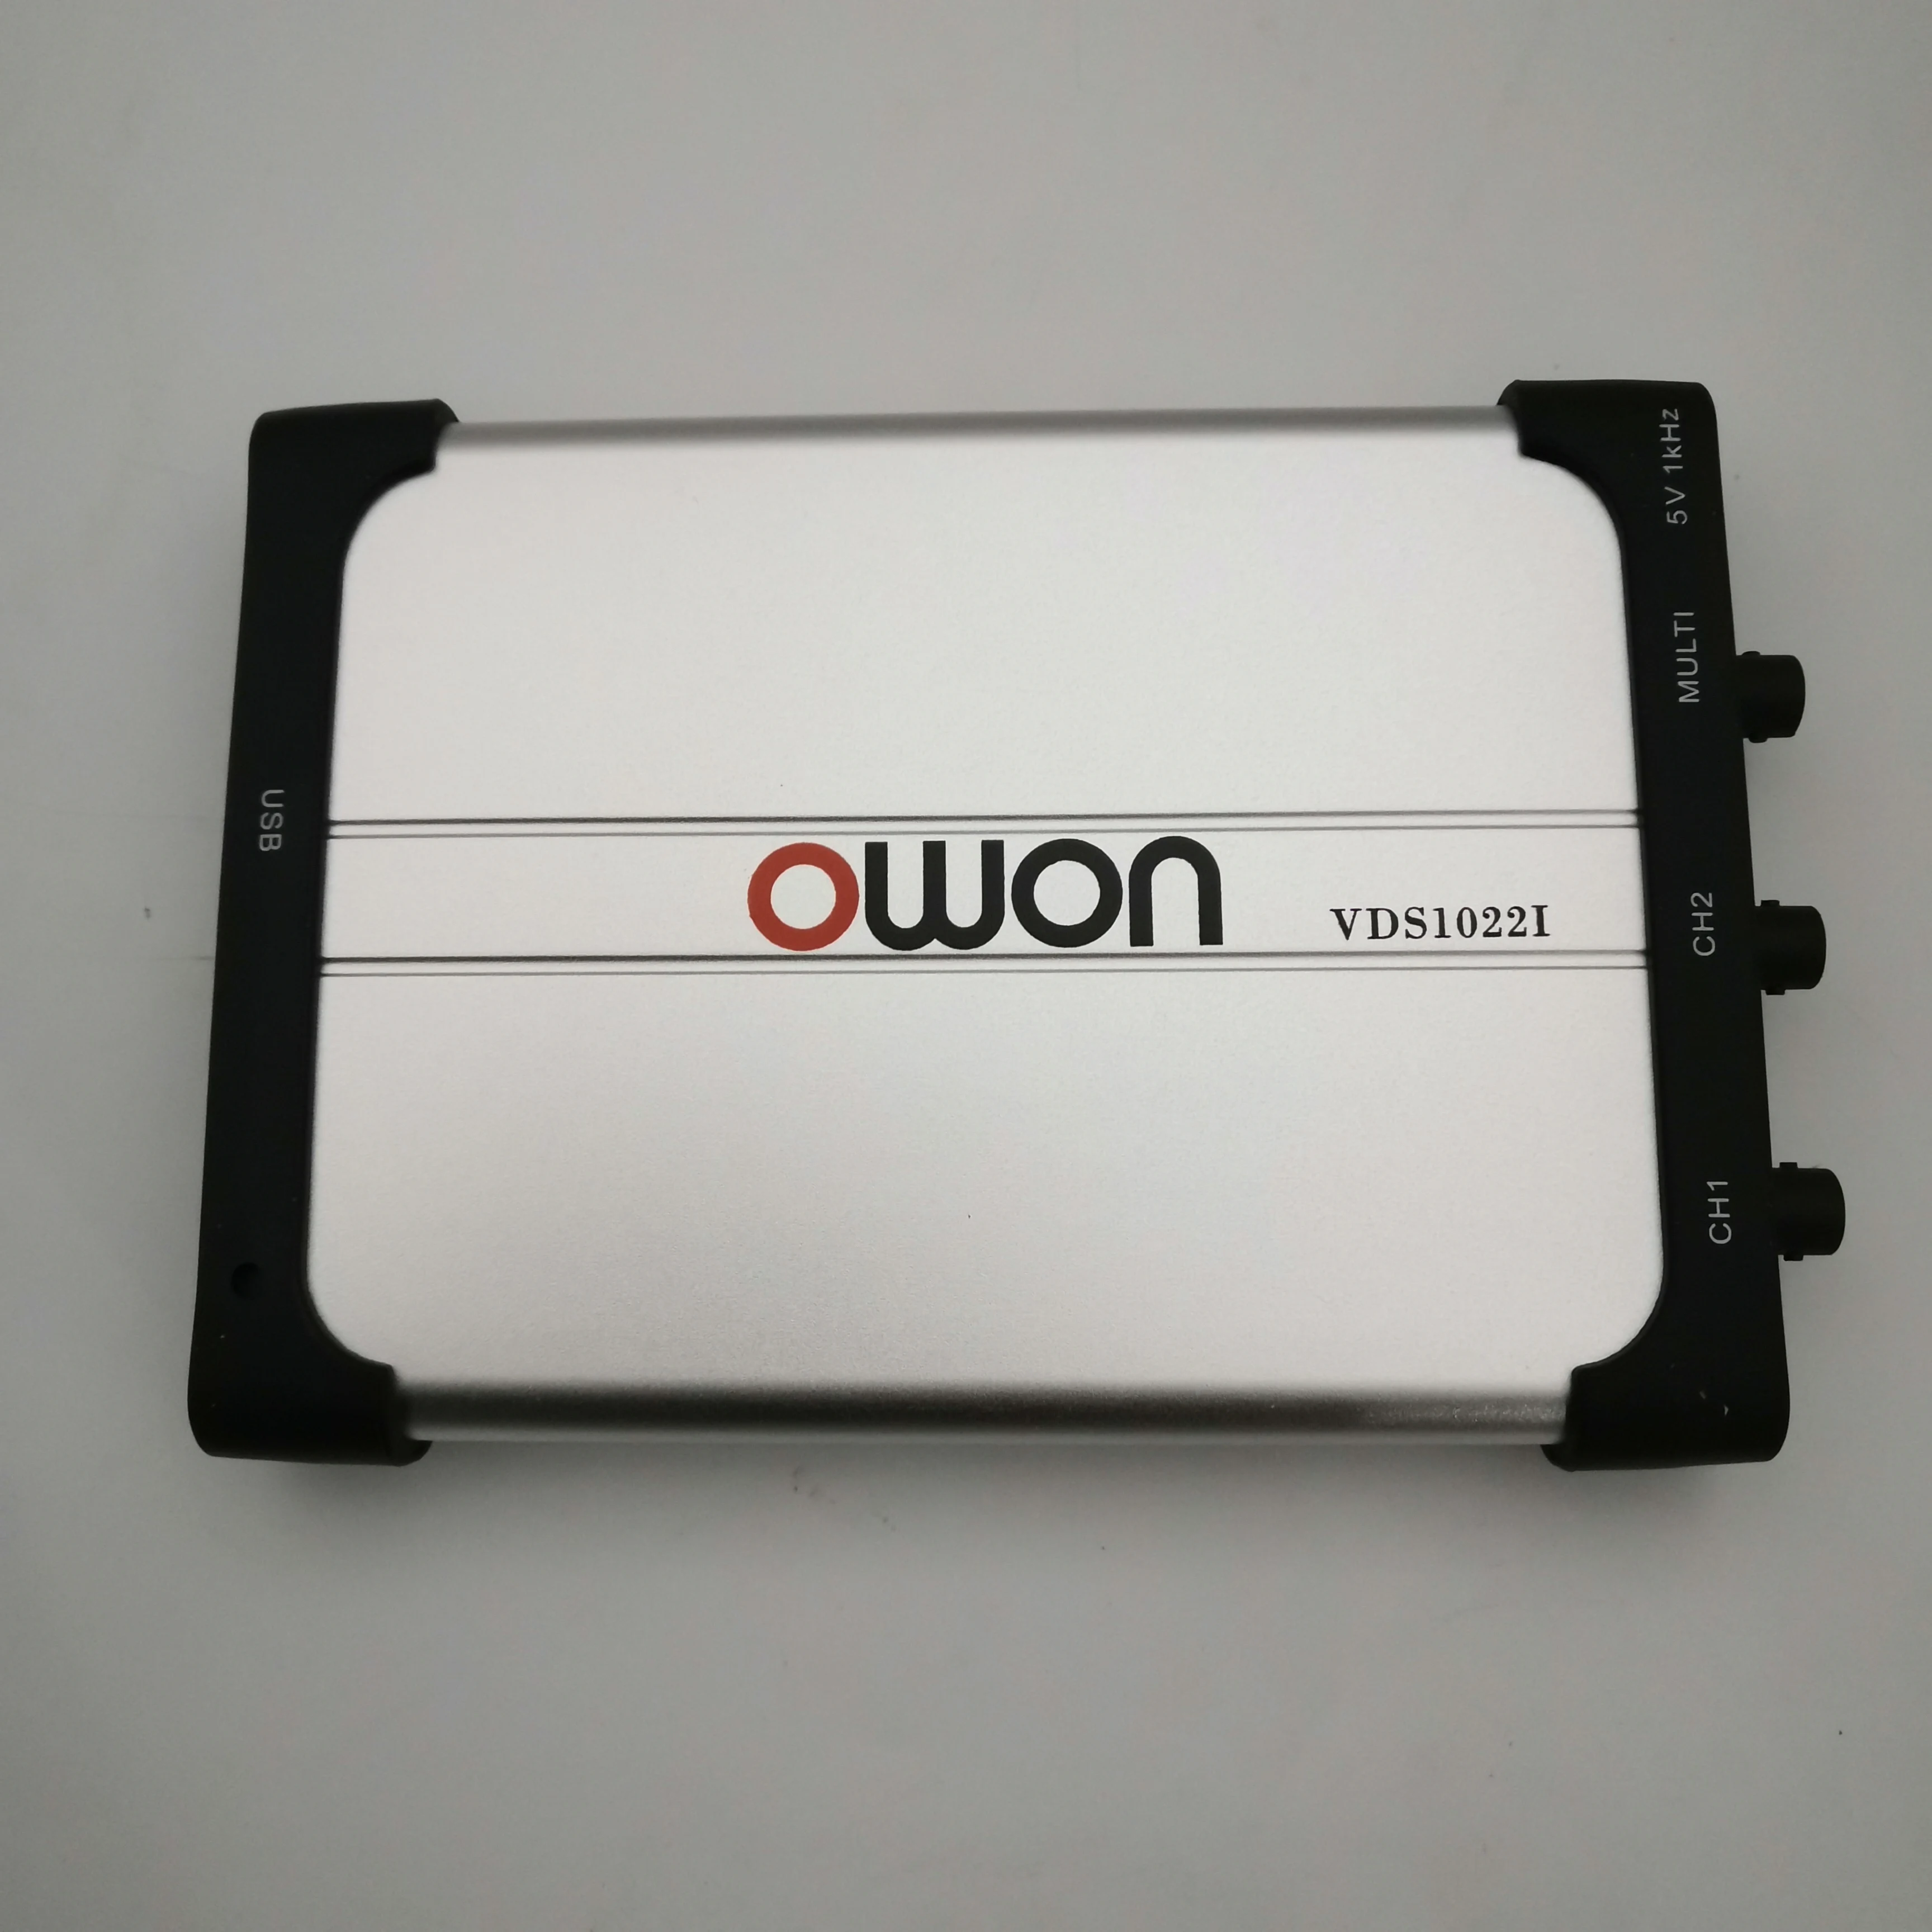 OWON VDS1022I USB isolation PC Dual-Channel Oscilloscope 25 MHz 2+1 CH 100MS/S 